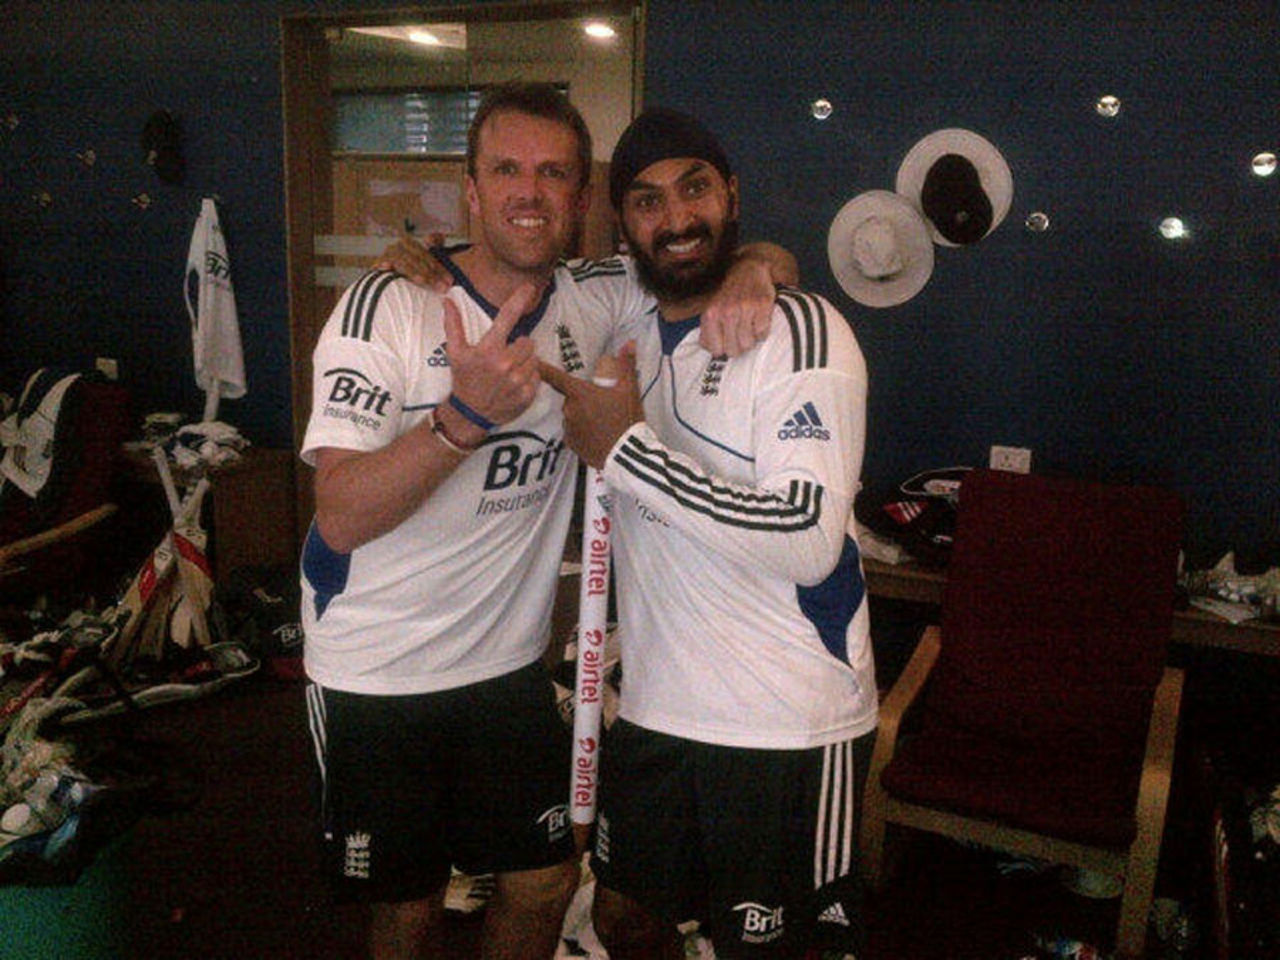 Graeme Swann and Monty Panesar in the England dressing room, India v England, 2nd Test, Mumbai, 4th day, Monday, November 26, 2012